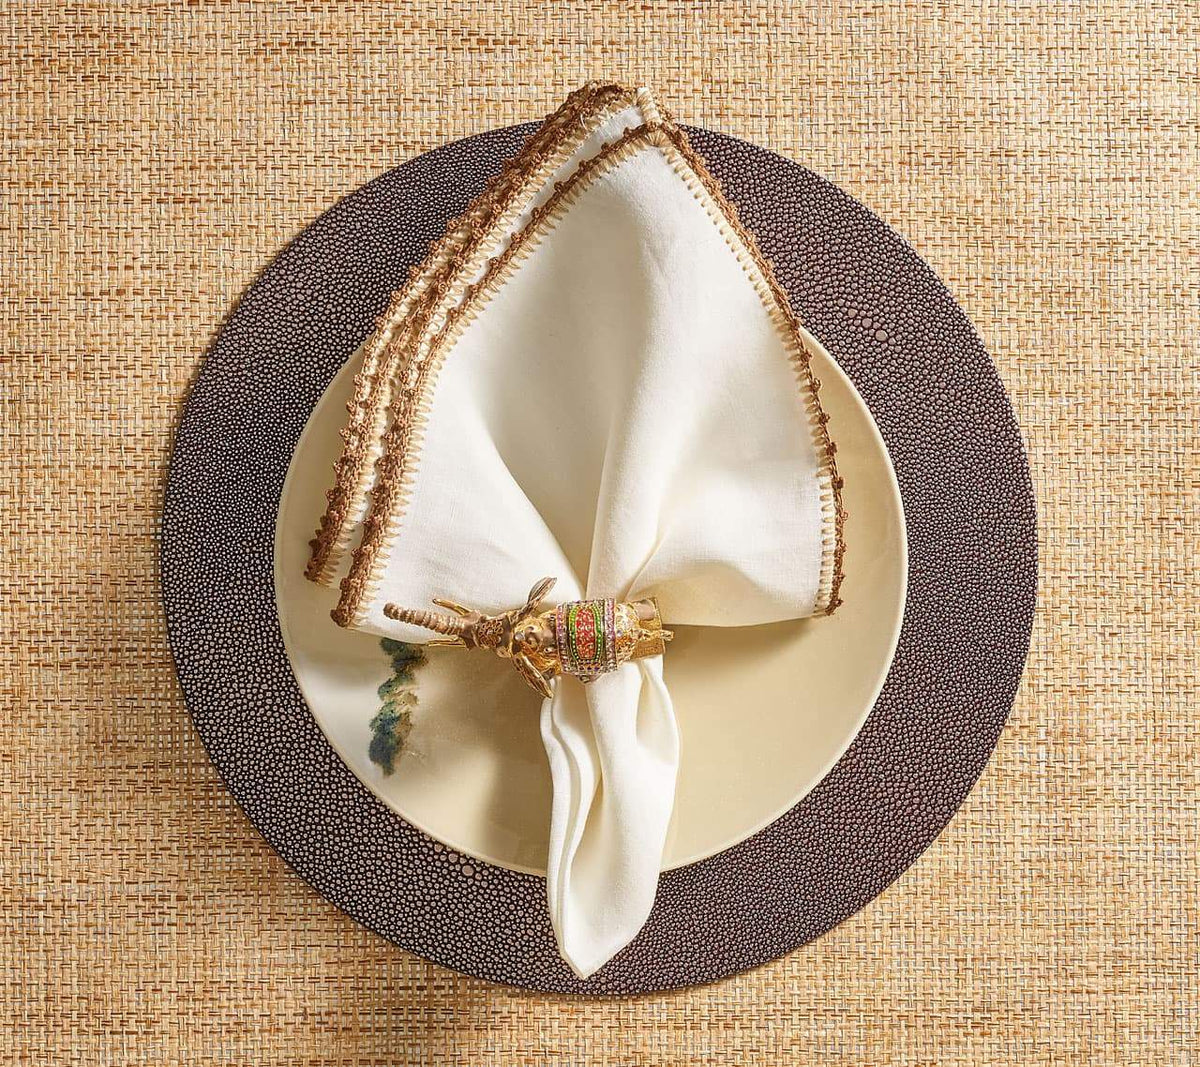 Kim Seybert Luxury Knotted Edge Napkin in White, Natural & Brown with Elephant Napkin Ring